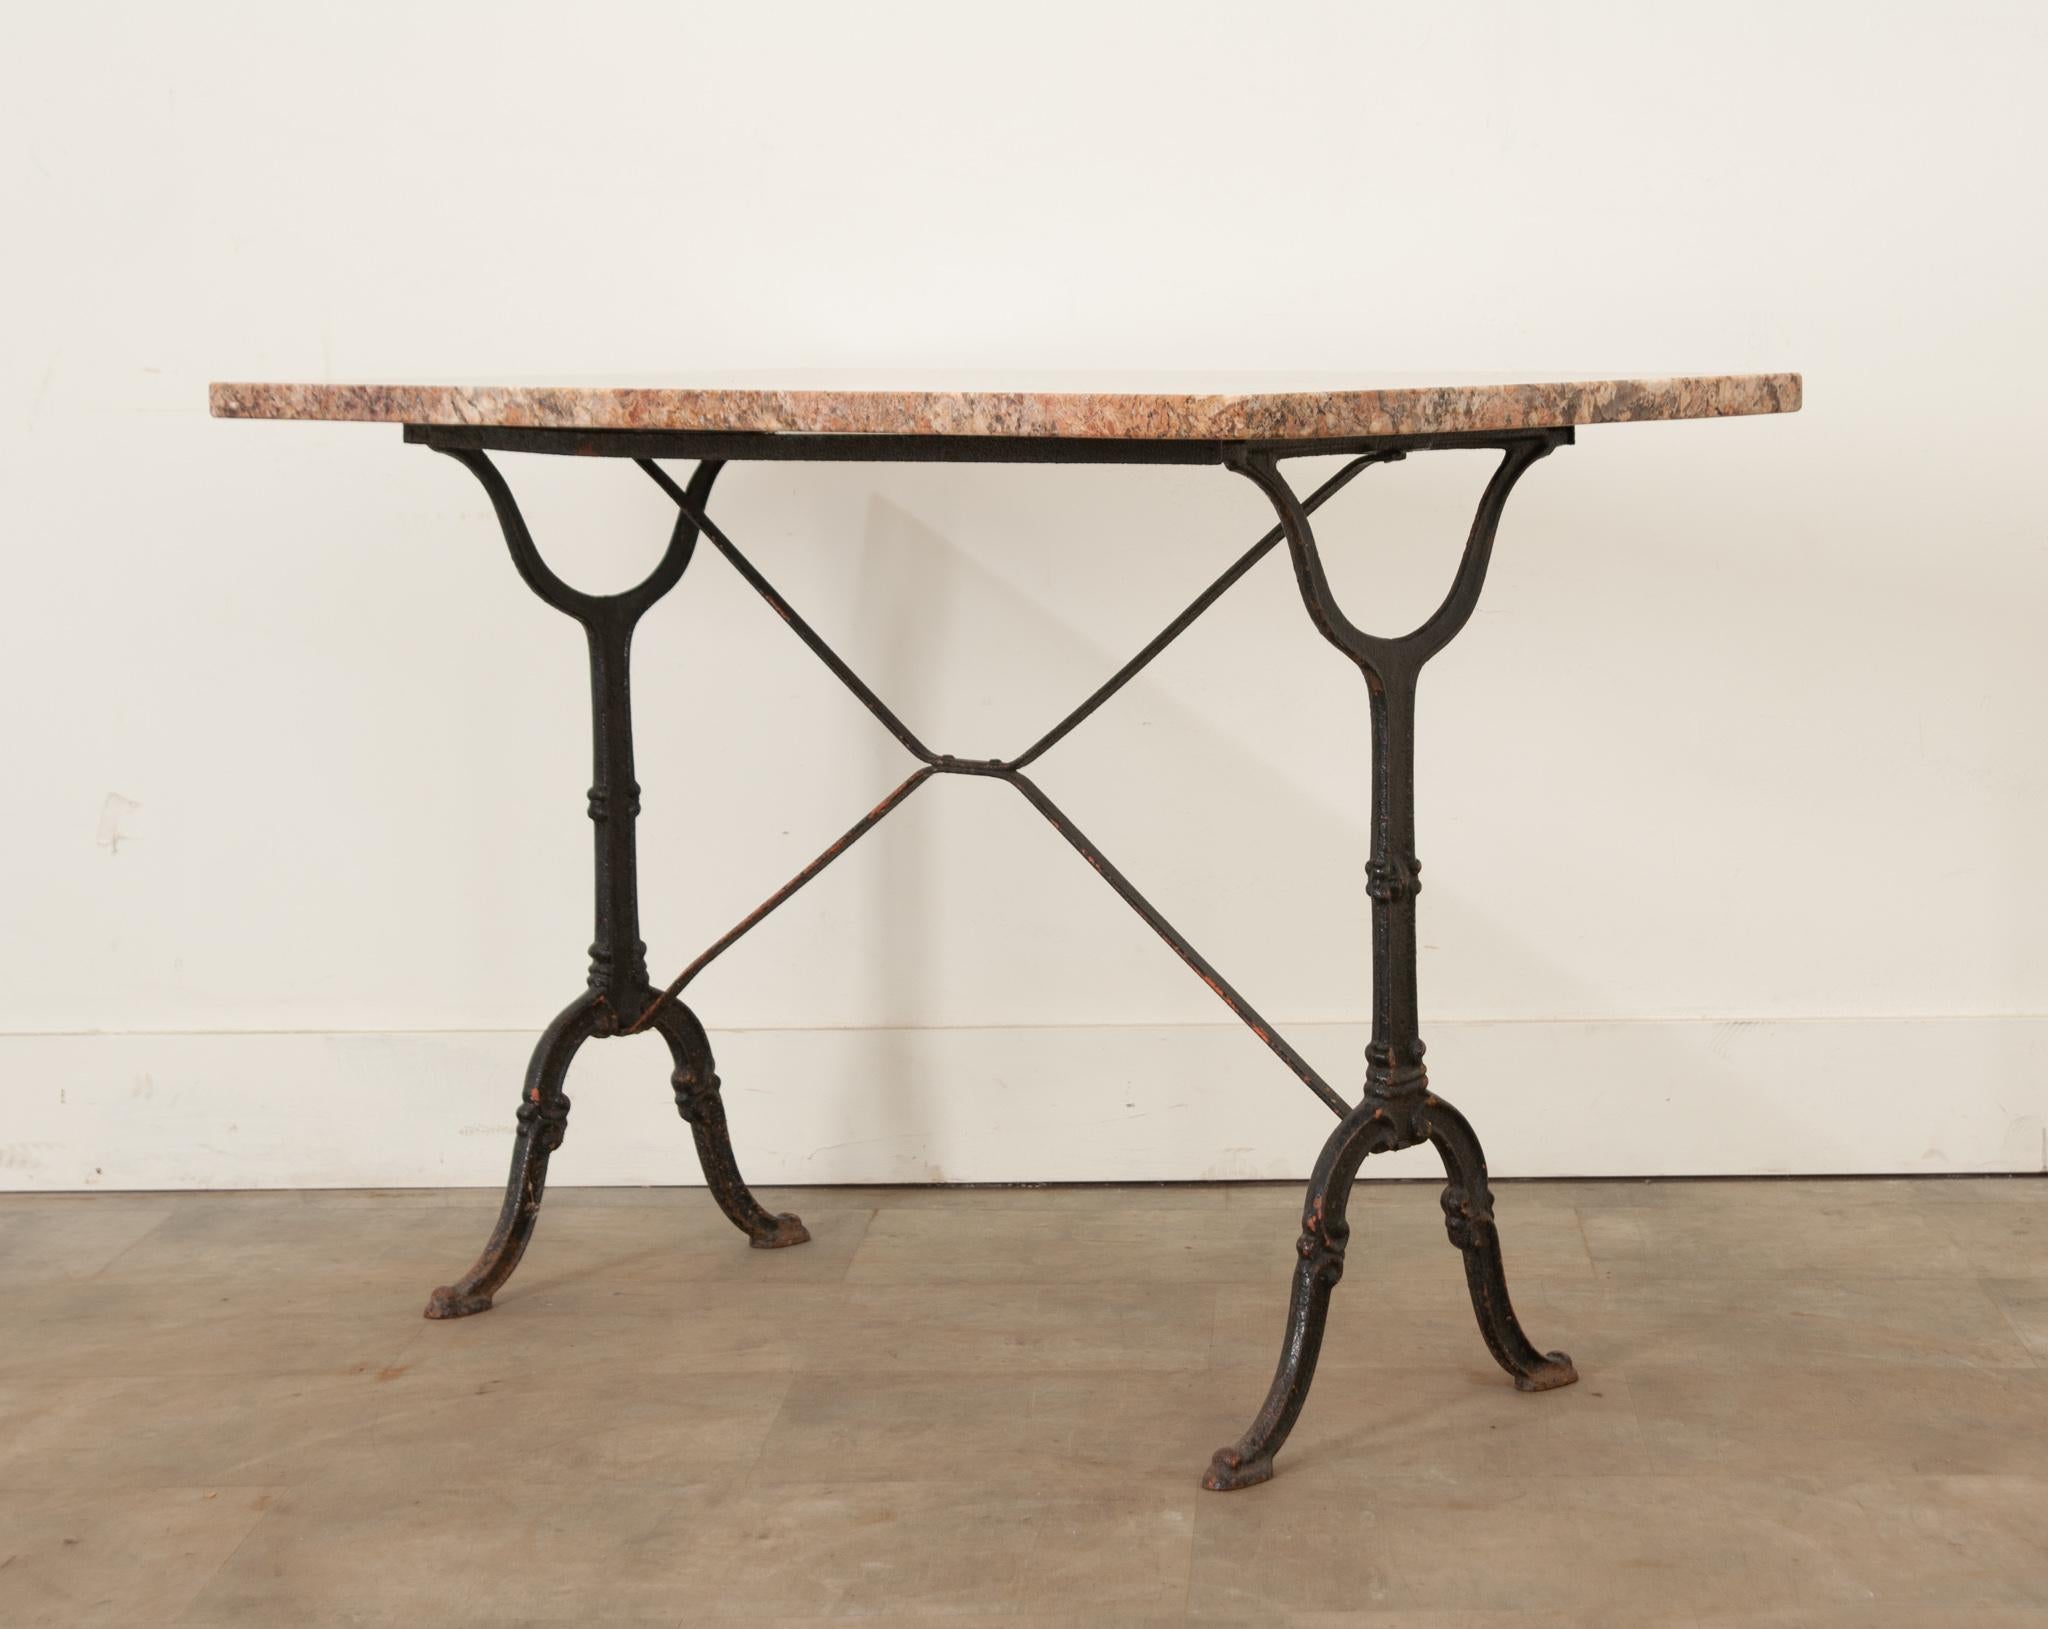 A lovely French marble-top bistro table with a classically styled black painted iron base. The more recent stone top has beautiful red, brown, and cream patterns throughout. The base has X-form supports and pad foot styled feet. Be sure to view the